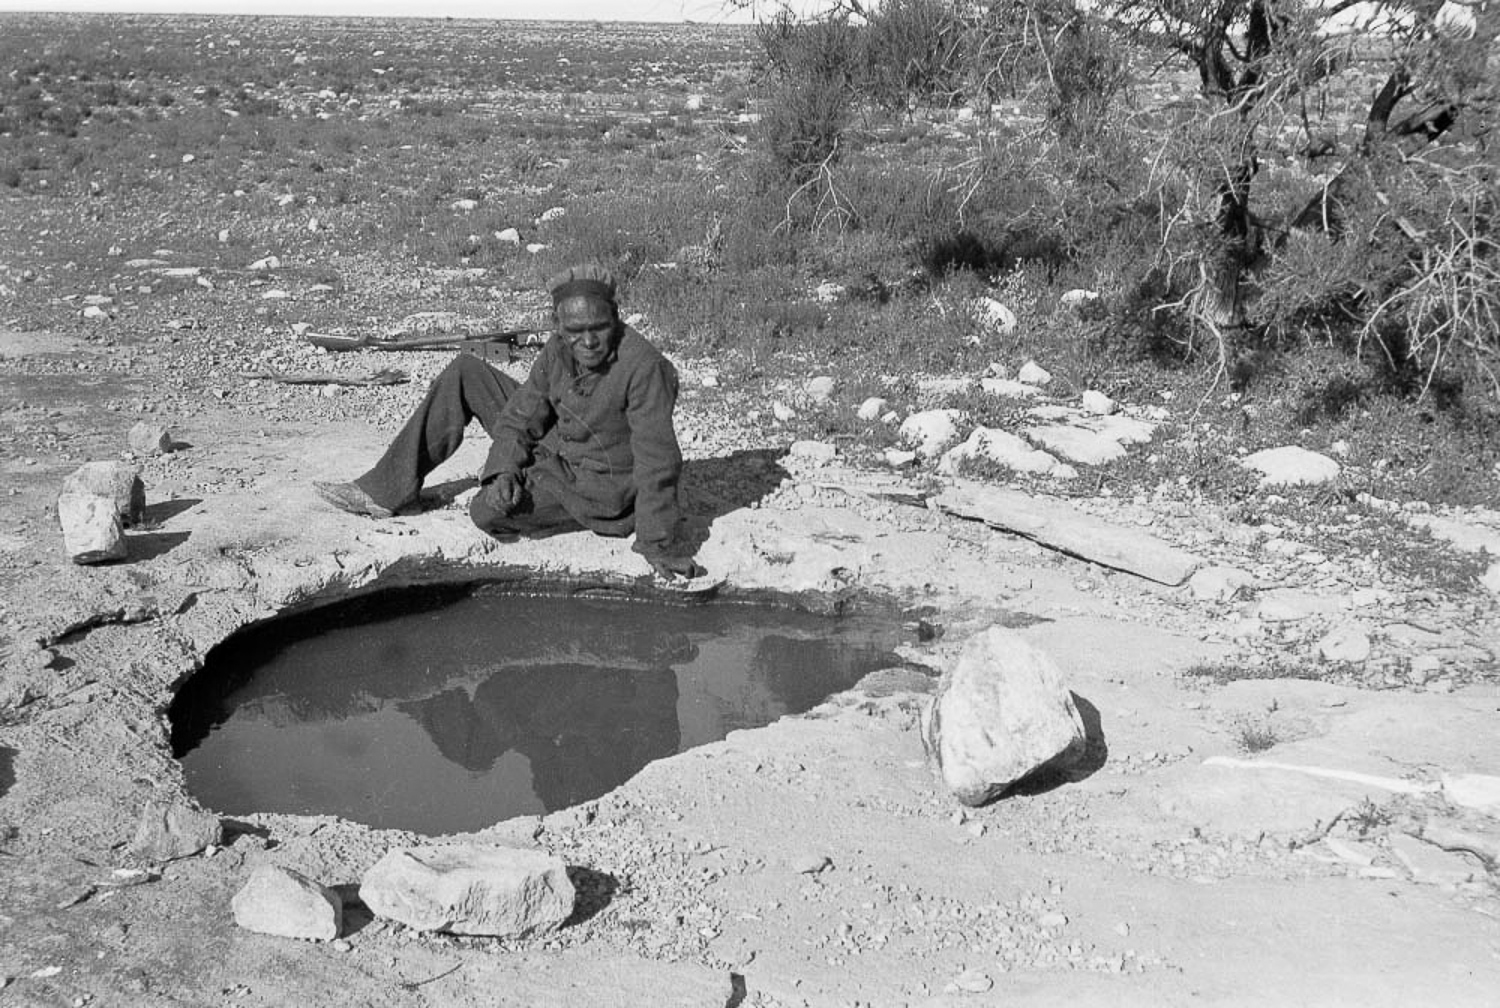 Tracker Jimmie Maadi sits next to the rockhole where Cundeelee mission was based. This water supply was known as Urpulurpulila by Anangu, which means ‘tadpole’ in Pitjantjatjarra language. It was by way of rock holes such as this, as well as other sources of water, that Anangu could survive in the harsh desert climate.